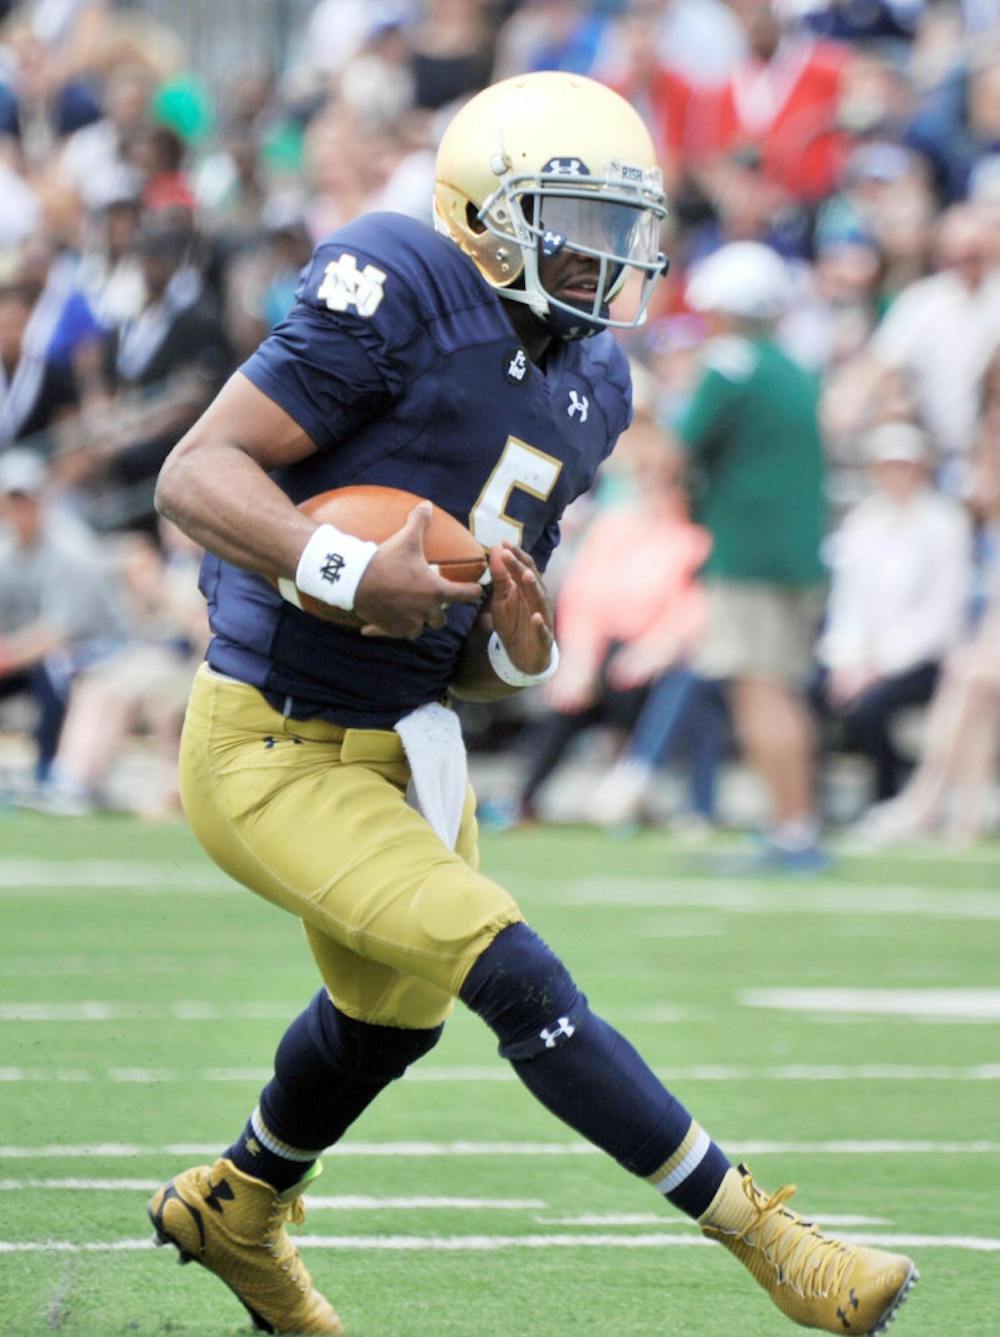 <p>Notre Dame quarterback Everett Golson (5) sprints into the end zone during the Blue Gold spring NCAA college football game, Saturday April 18, 2015 in South Bend, Indiana.</p>